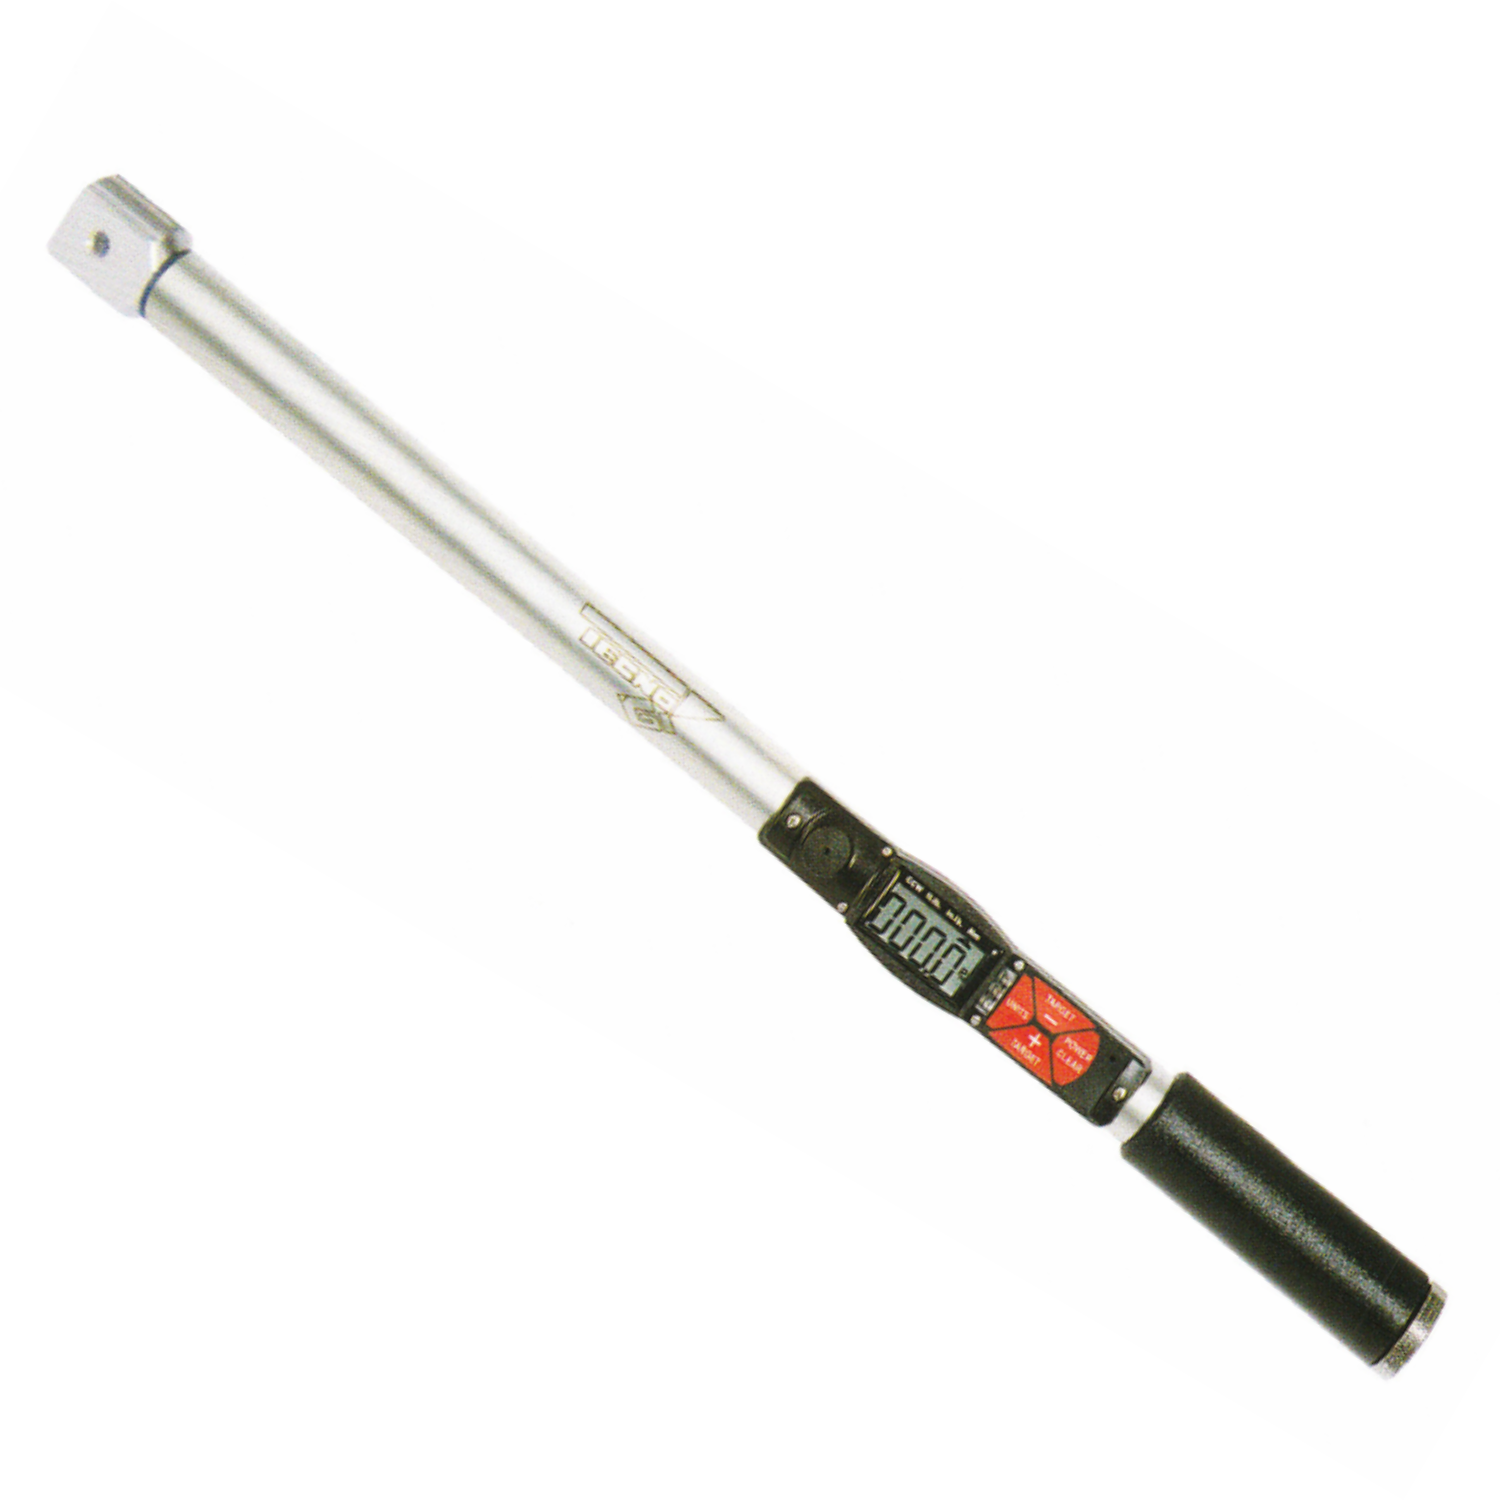 TECNOGI 3534F Digital Torque Wrench with Rotating Head 550mm - Premium Digital Torque Wrench from TECNOGI - Shop now at Yew Aik.